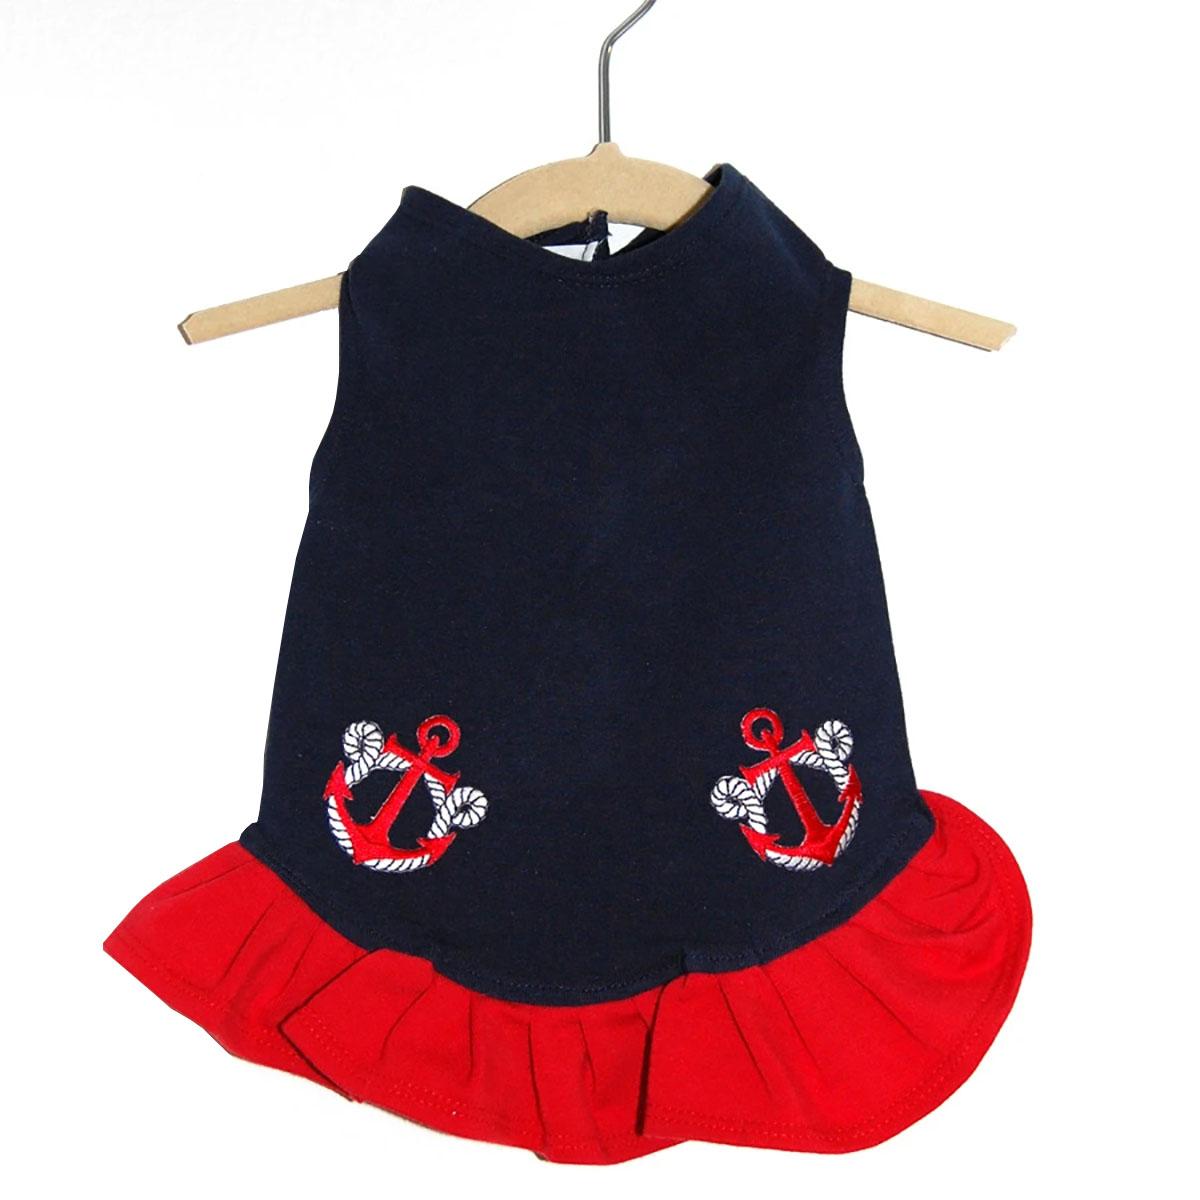 Daisy & Lucy Anchors Away Dog Dress - Navy/Red